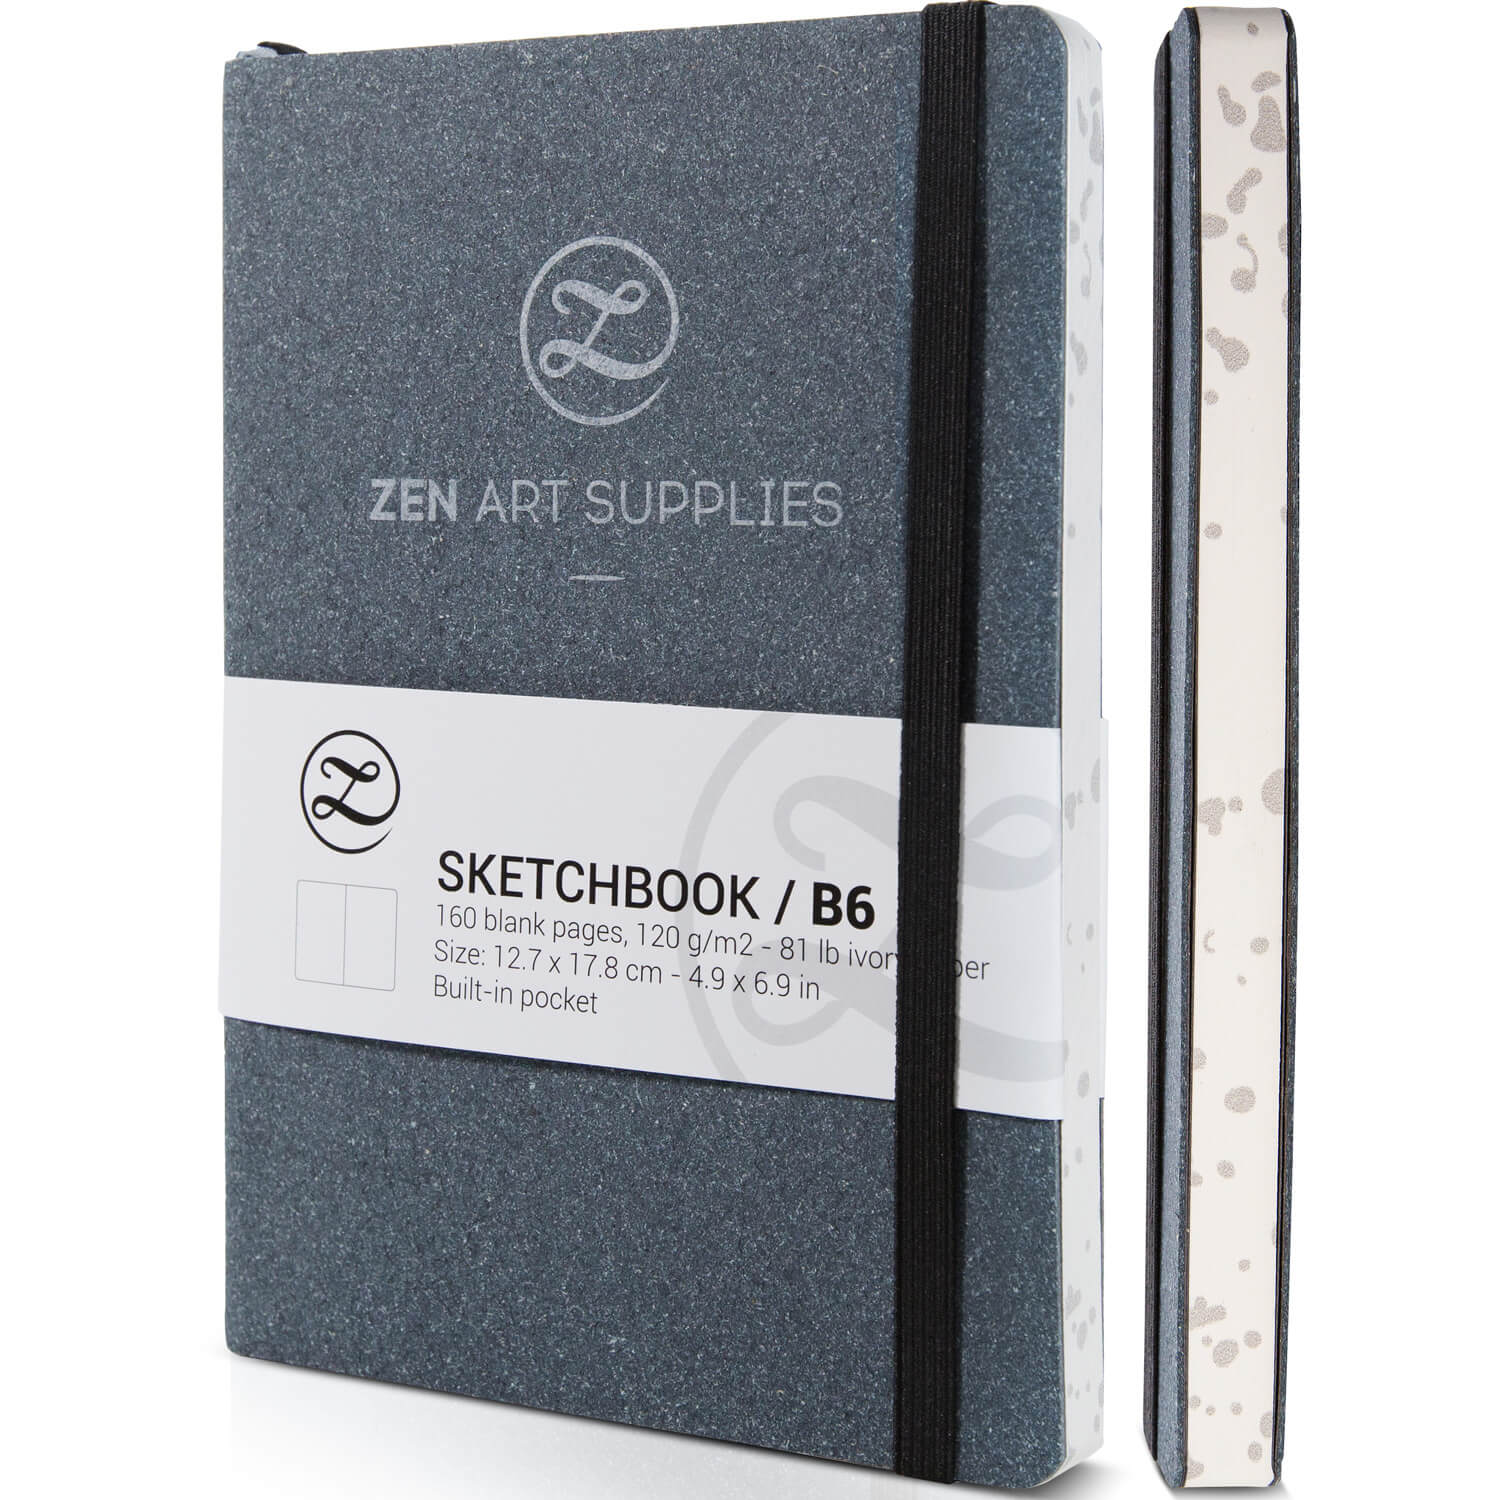 Big Book of Ideas to Sketch, Drawing Book, Sketchbook Filled With Prompts,  Art Book, Gifts for Artists, Sketching Journal, Art Notebook 